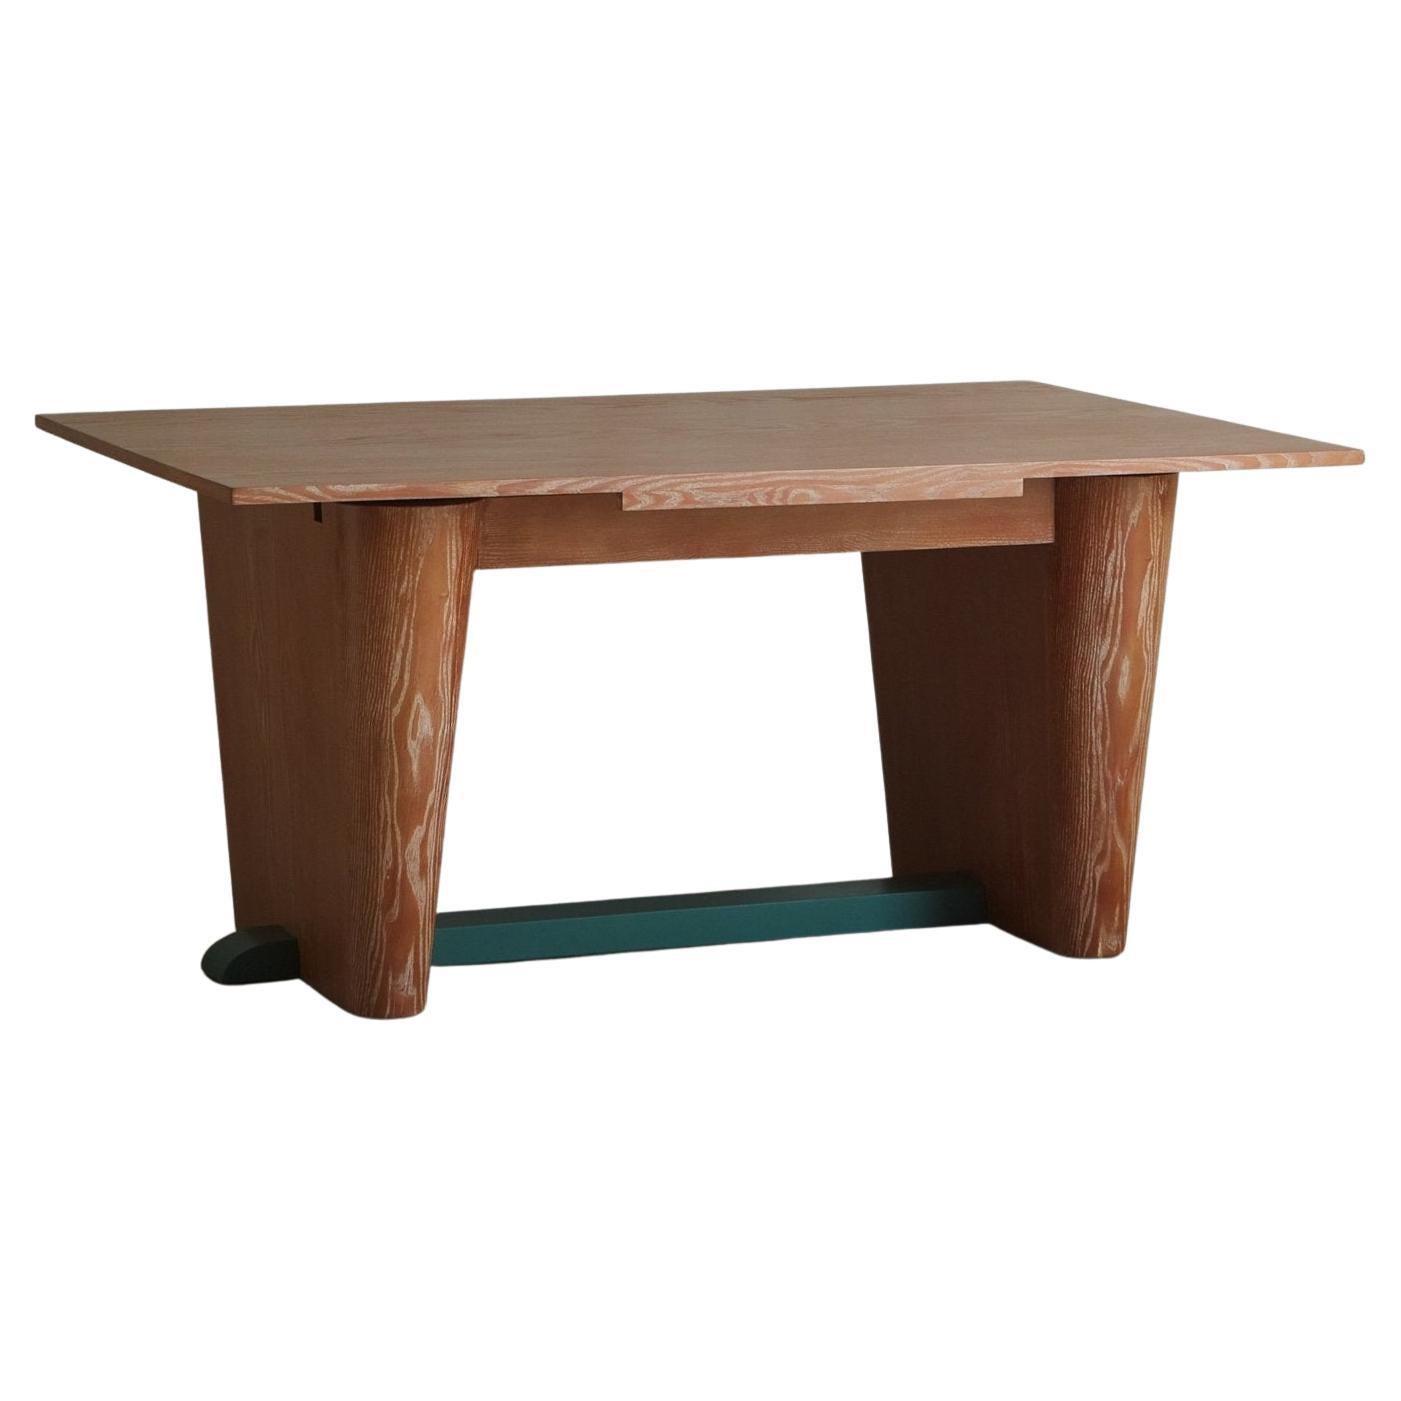 Ash Wood Desk or Table in the Style of Jules Leleu, France 1940s